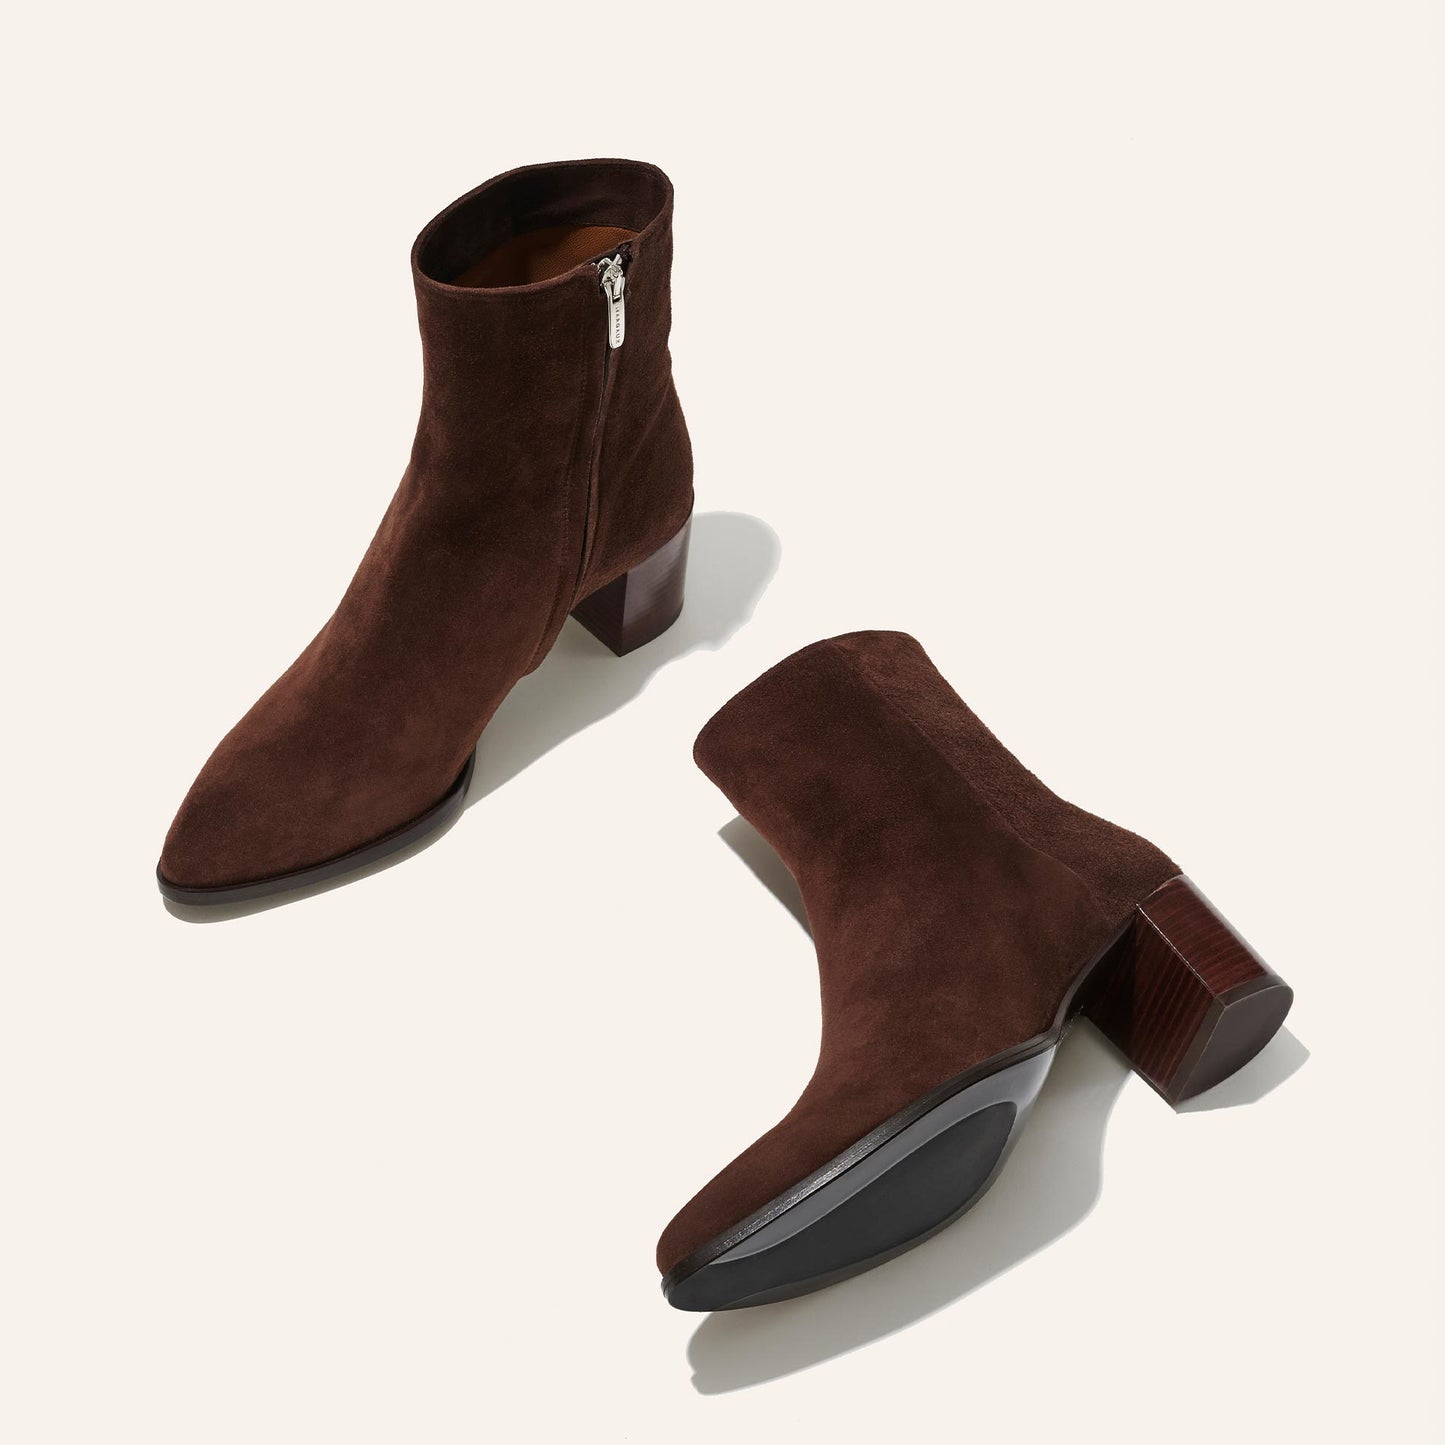 The Downtown Boot - Chocolate Suede